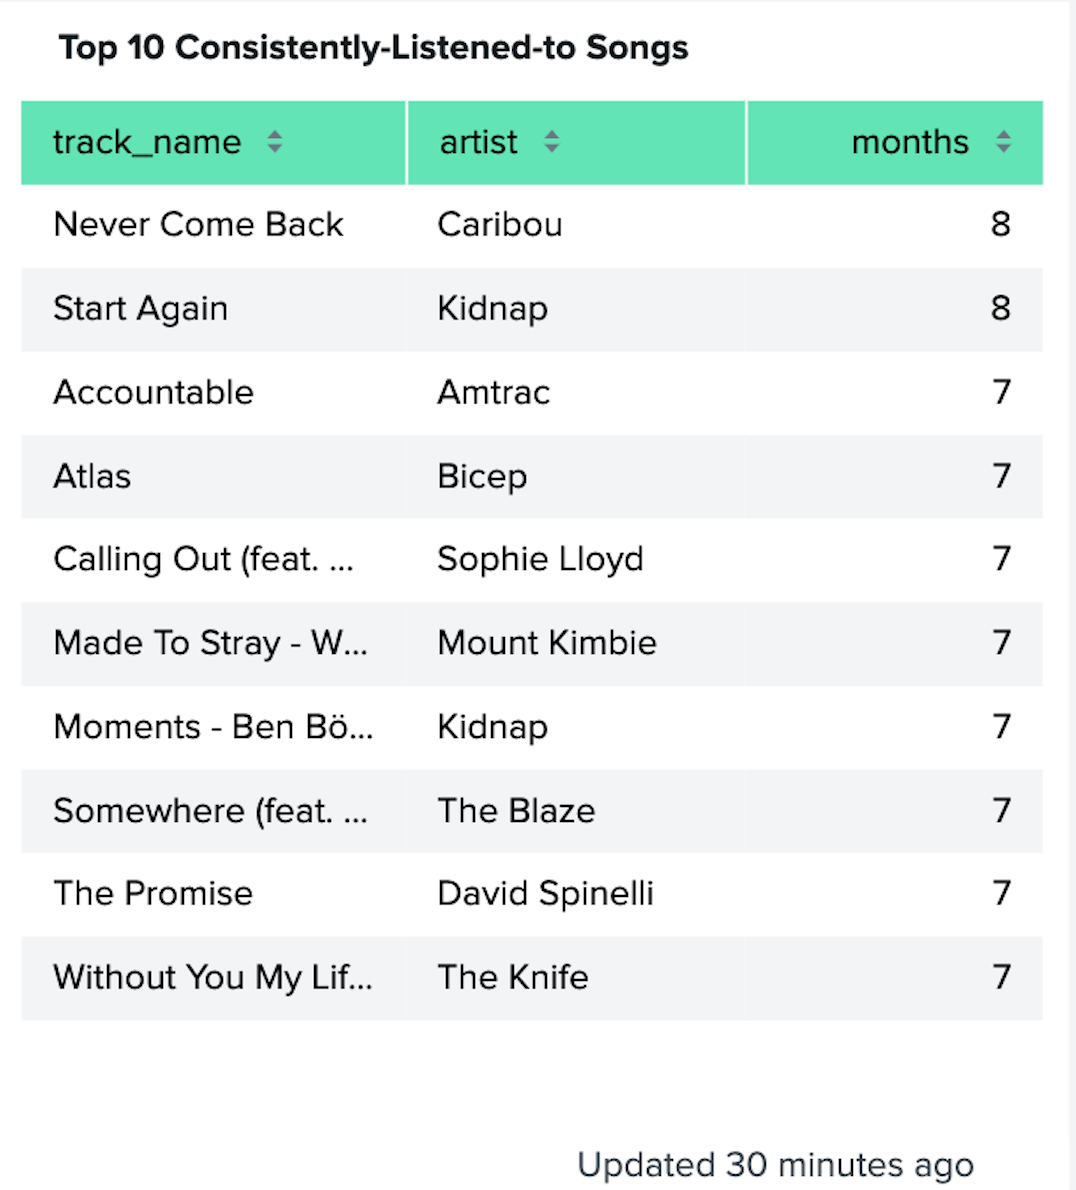 Table of tracks listened to consistently in 2020, Never Come Back by Caribou listened to at least once in 8 months of 2020, Start Again by Kidnap with 8 months, Accountable by Amtrac with 7 months, Atlas by Bicep with 7 months, Calling out by Sophie Lloyd with 7 months, Made to Stray by Mount Kimbie for 7 months, Moments (Ben Böhmer Remix) by Kidnap with 7 months, Somewhere feat. Octavian by the Blaze with 7 months, The Promise by David Spinelli with 7 months, and Without You My Life Would Be Boring by The Knife with 7 months.